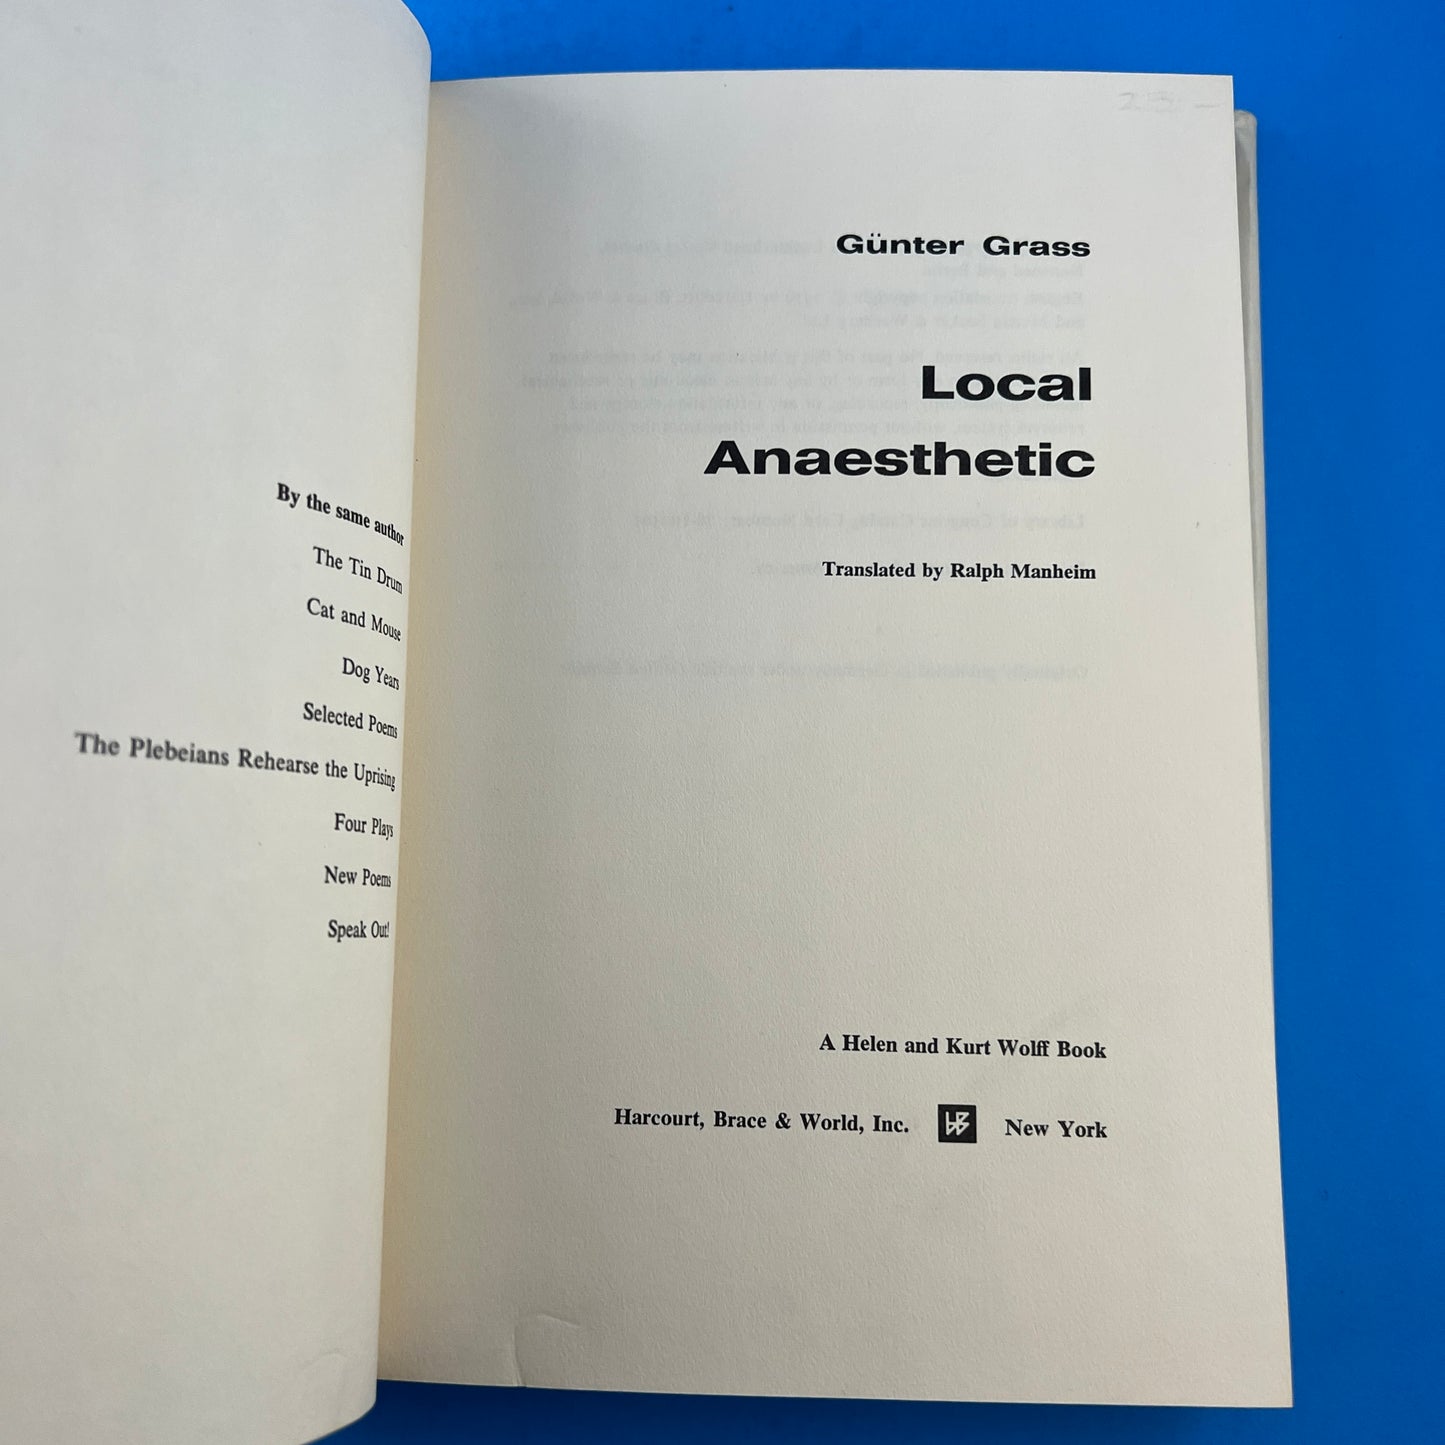 Local Anaesthetic